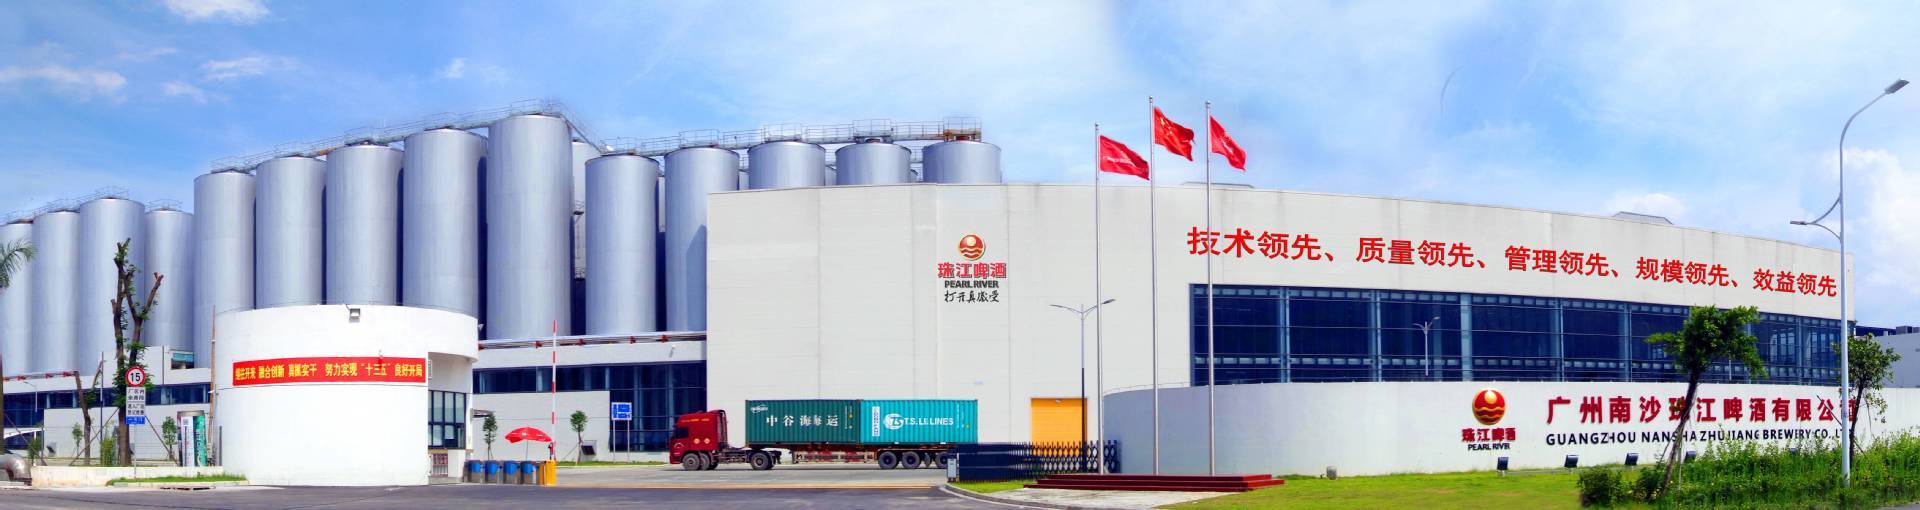 The Pearl River Beer Co., Ltd